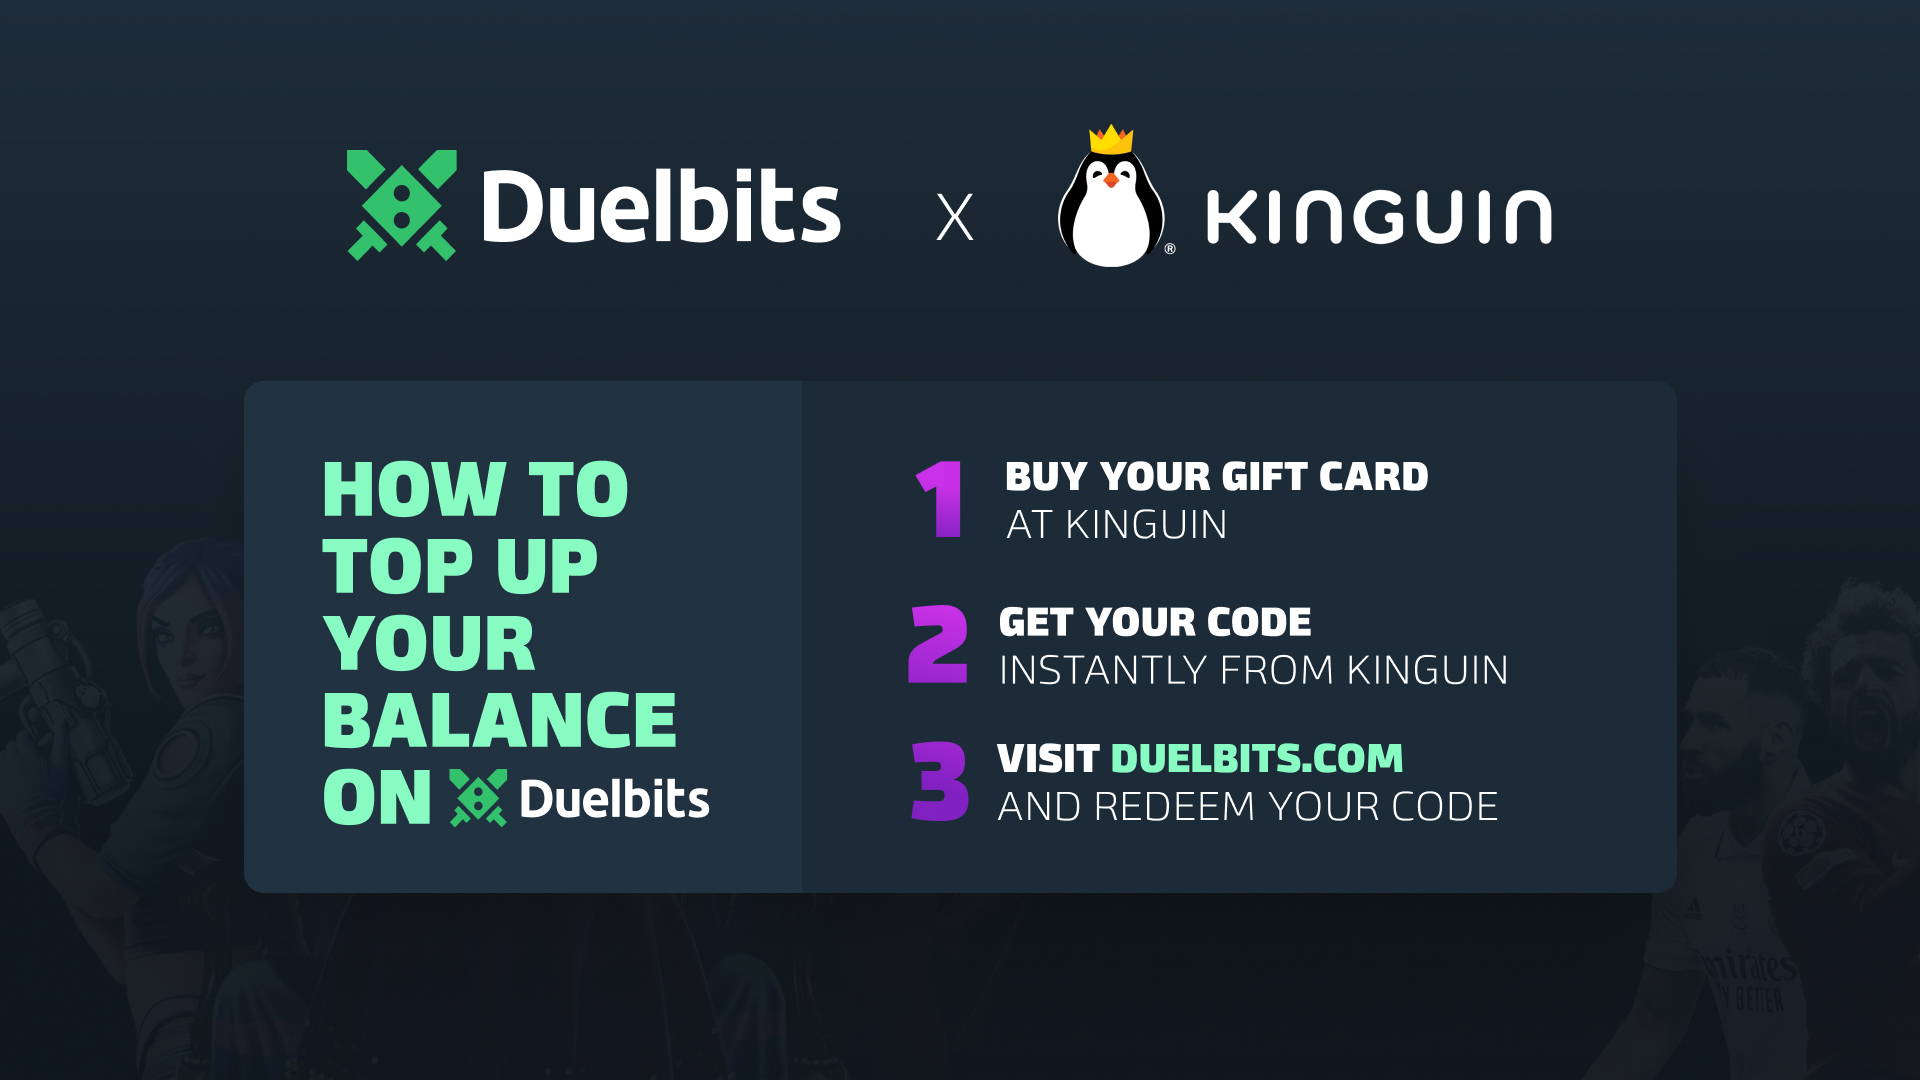 [$ 6.27] DuelBits $5 Gift Card